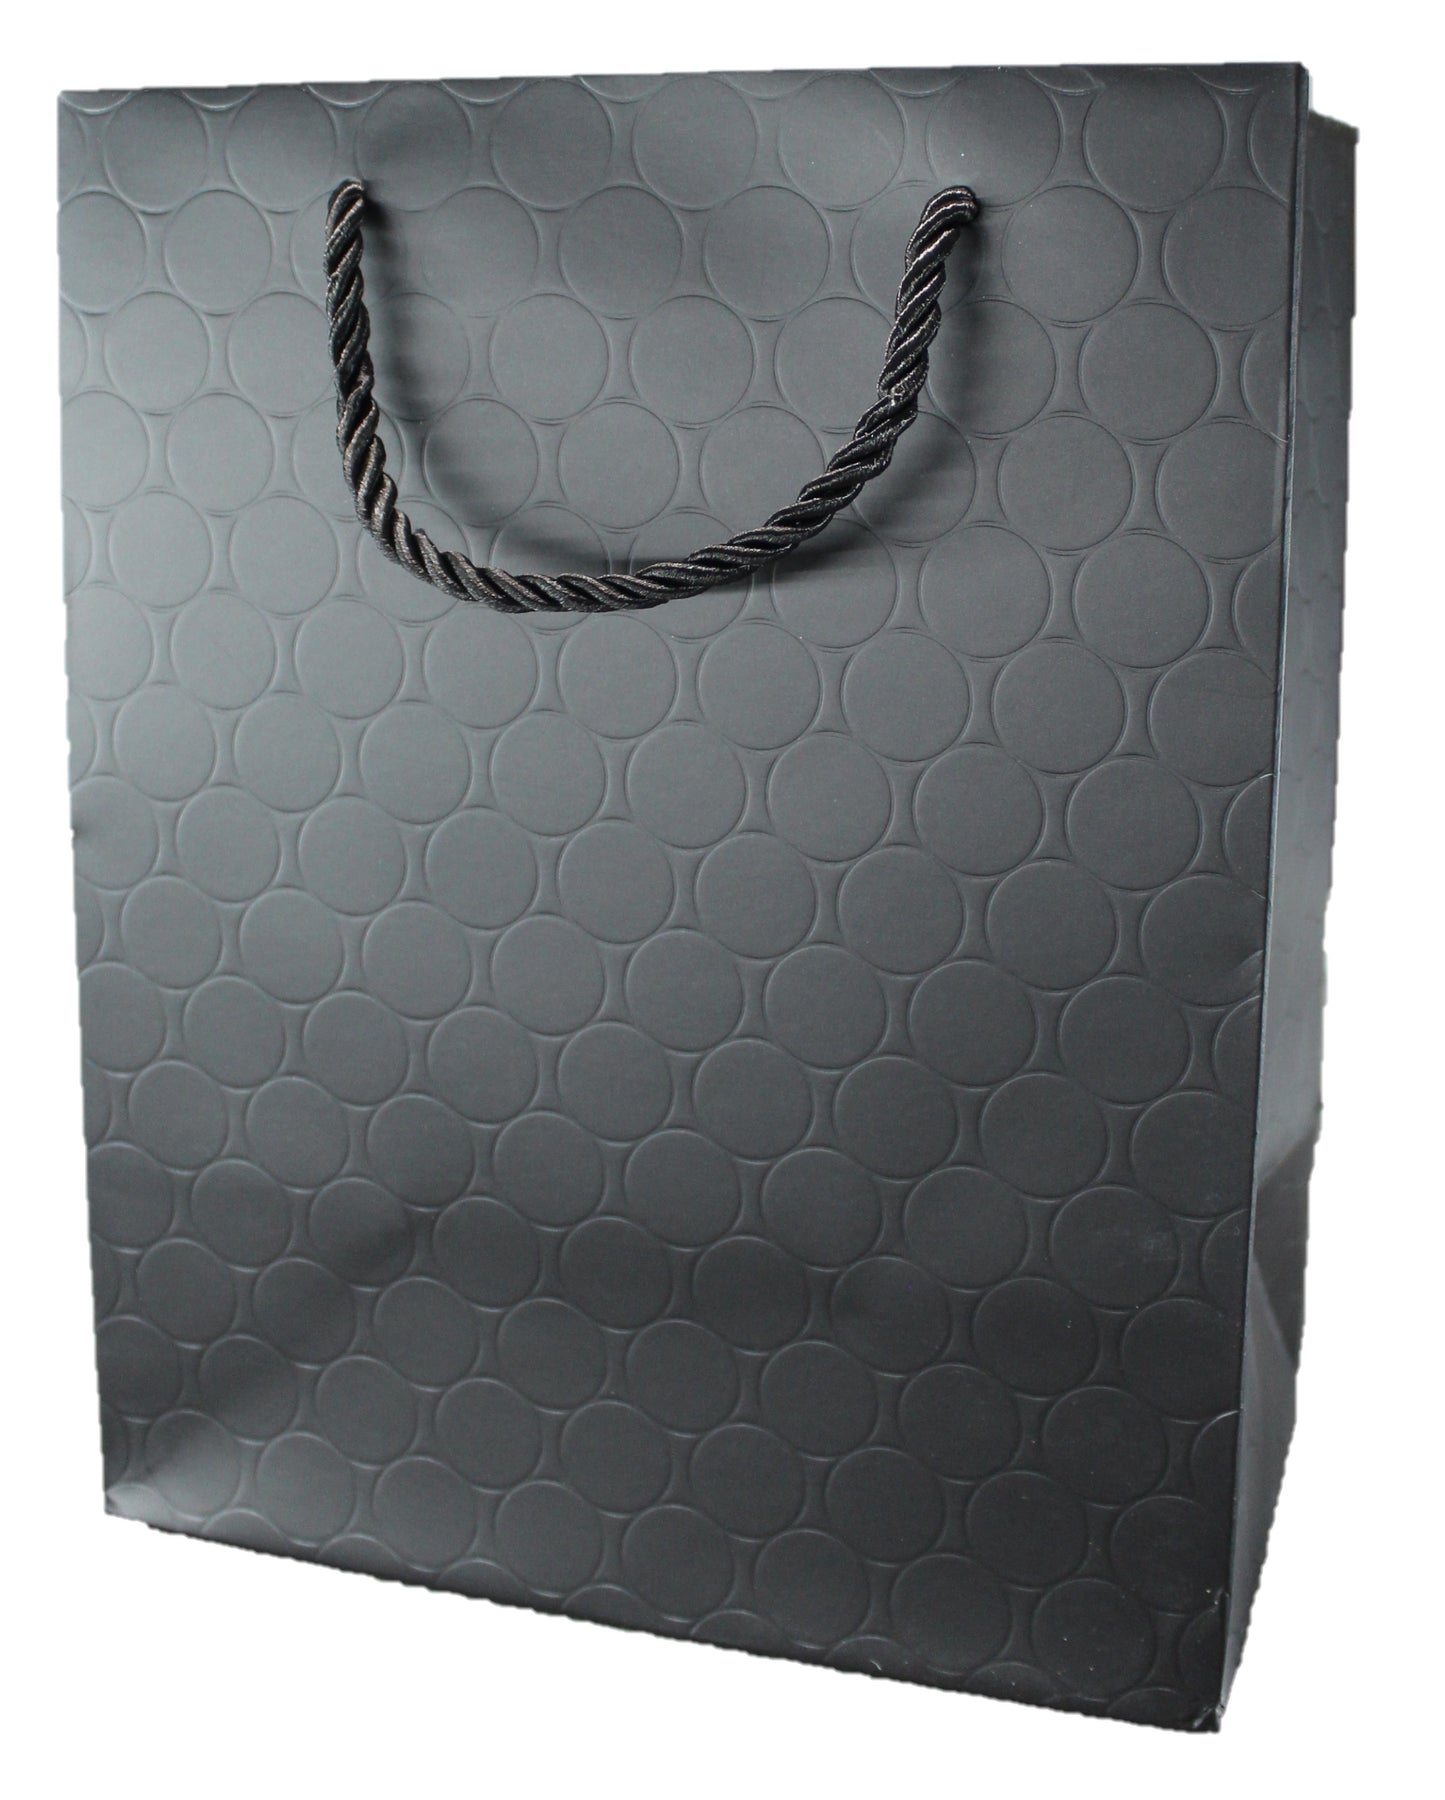 Black Gift Bags with Handles 8x5x10 Luxury Black Paper Shopping